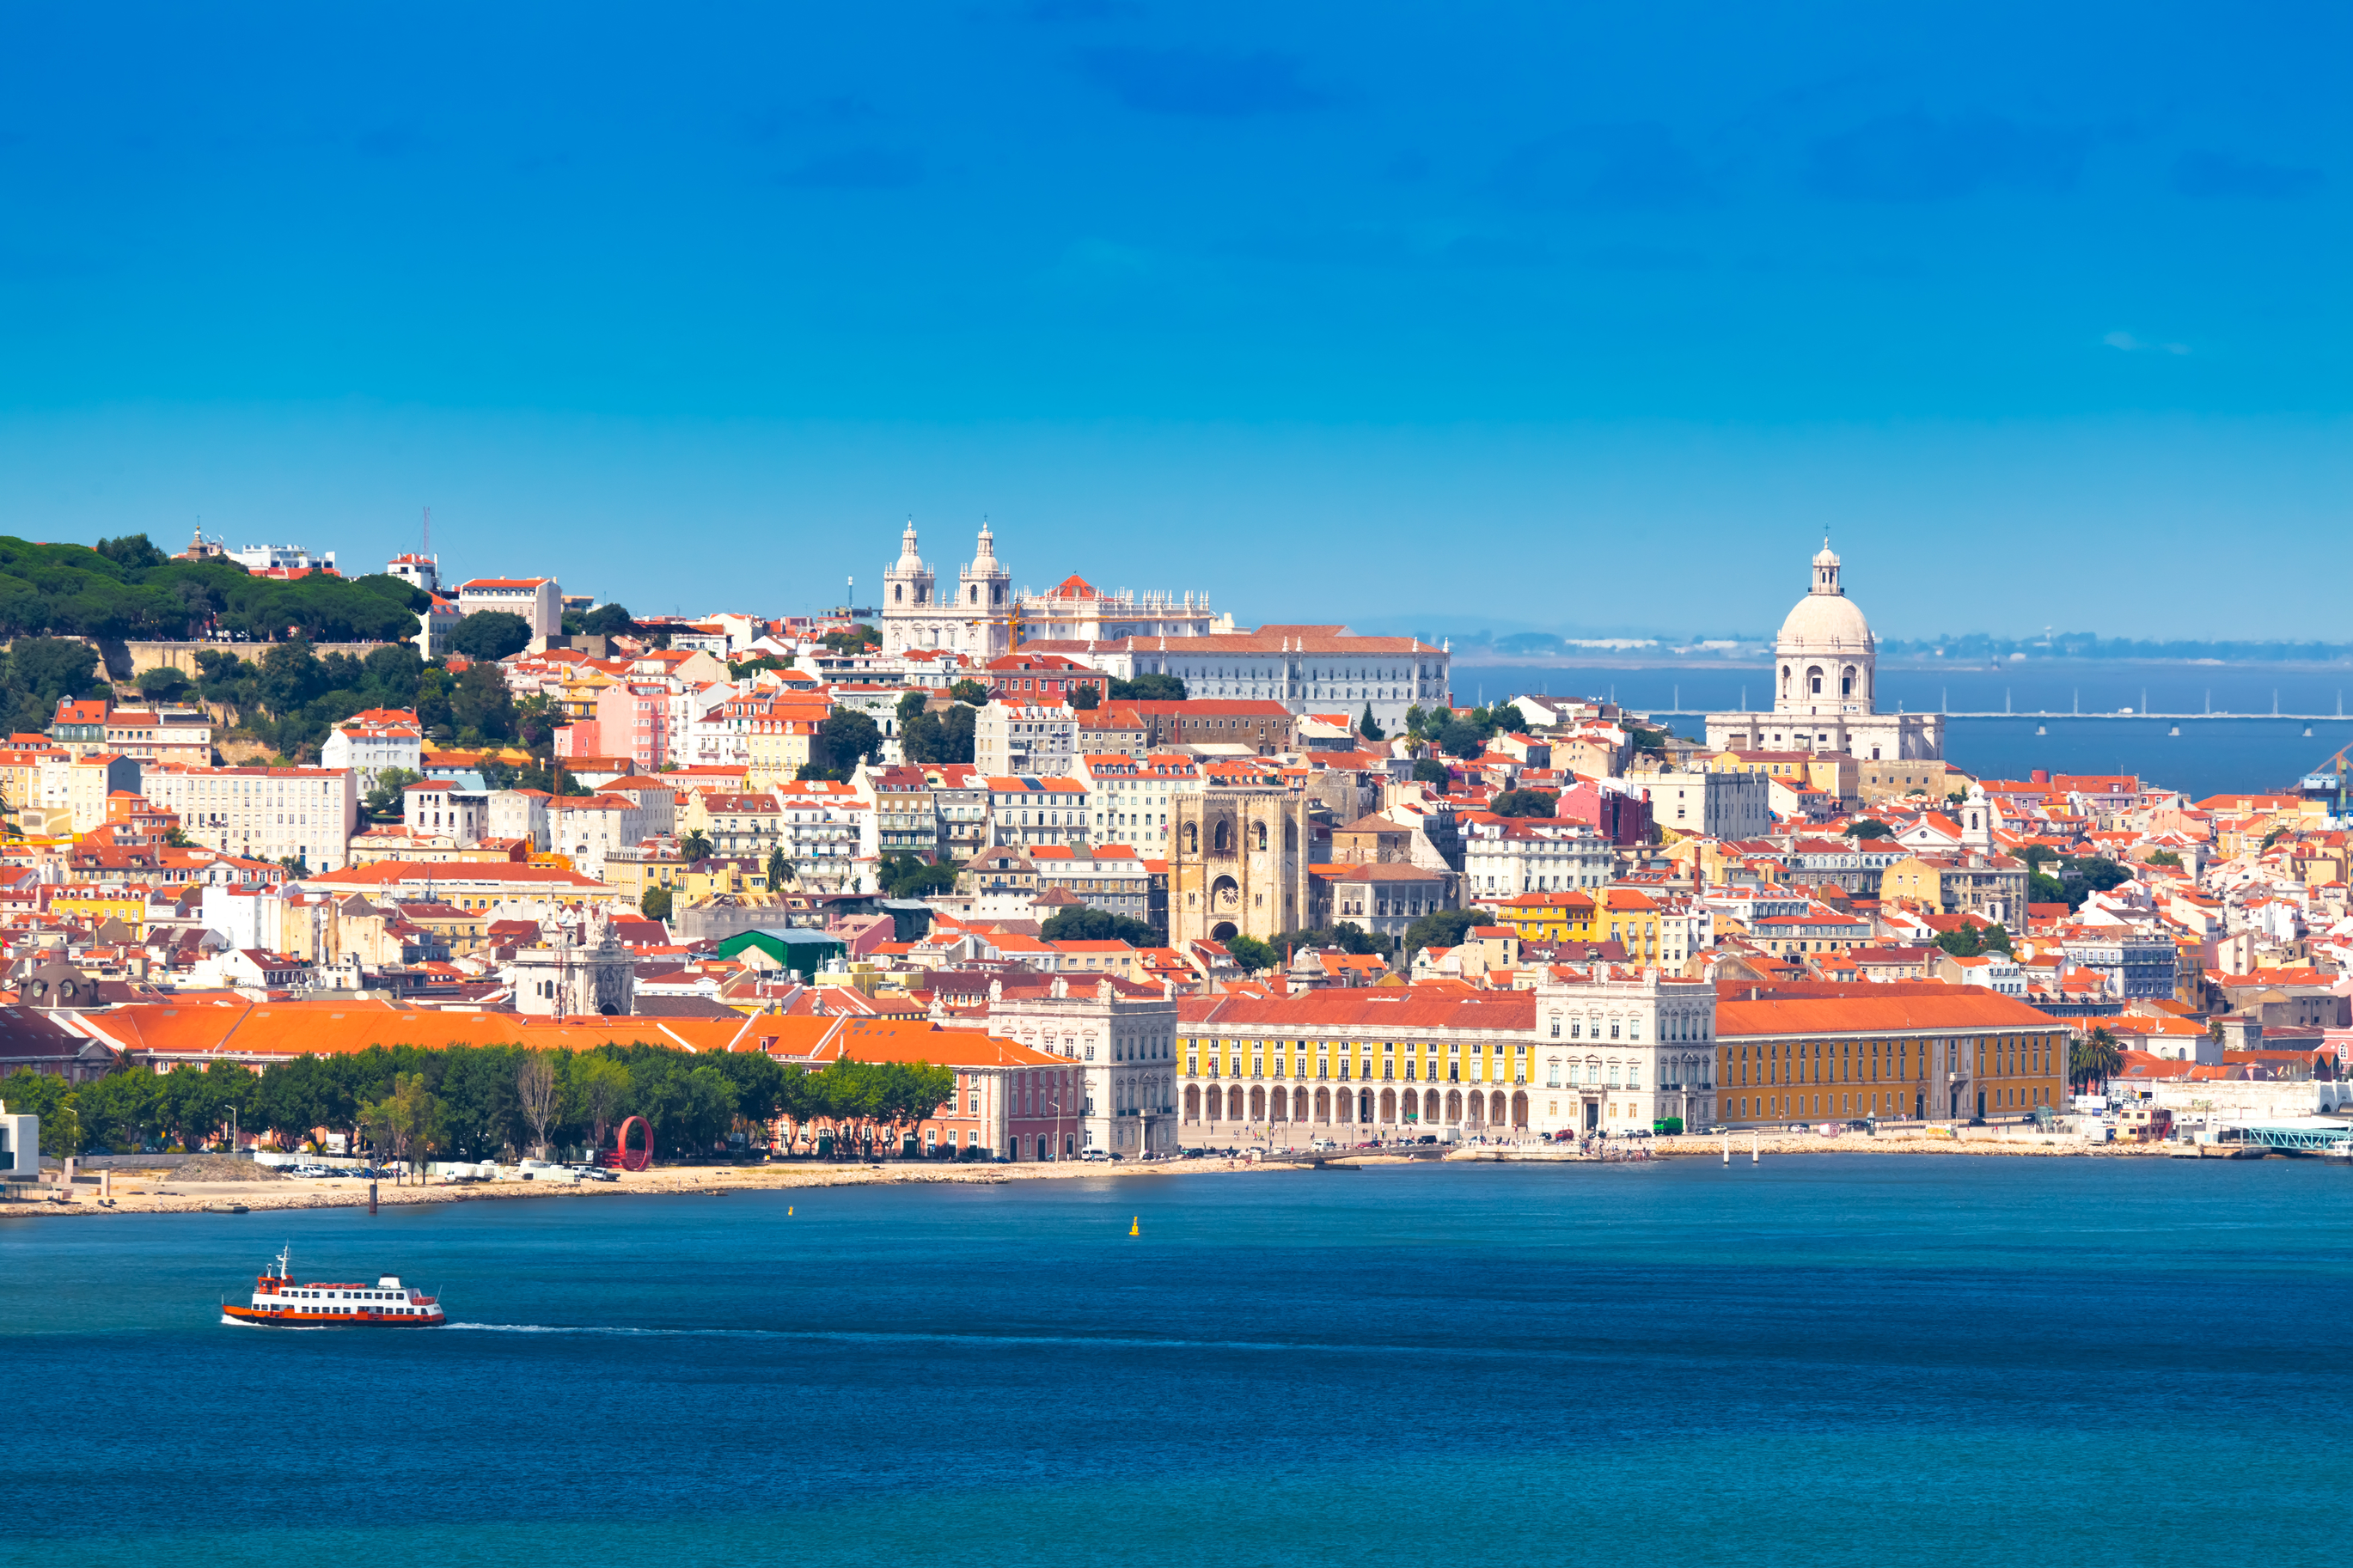 6-night Portugal travel package with air & half-day tours from $949